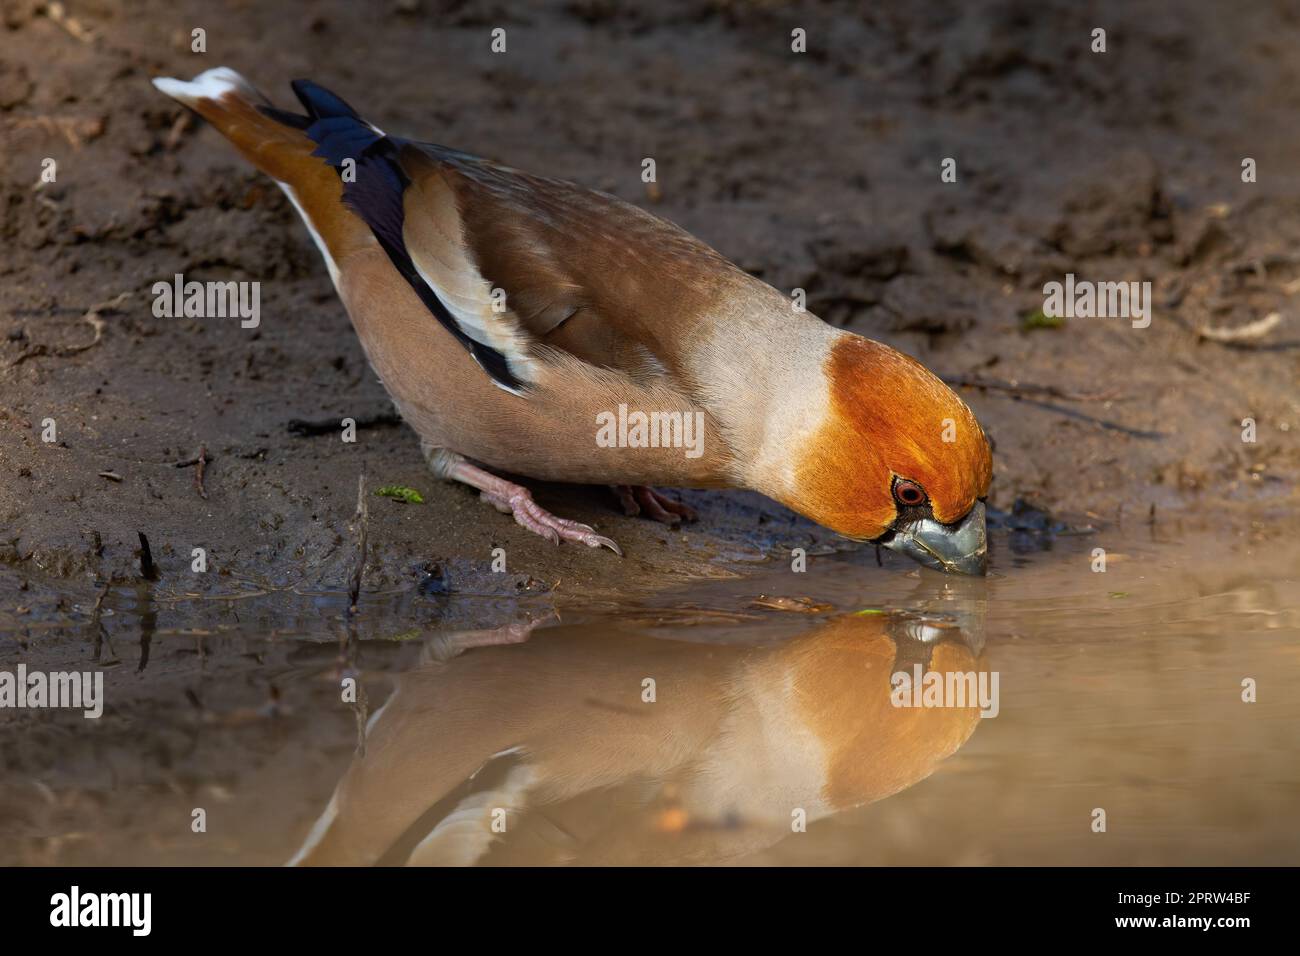 Hawfinch drinking water from spash with reflection on surface Stock Photo